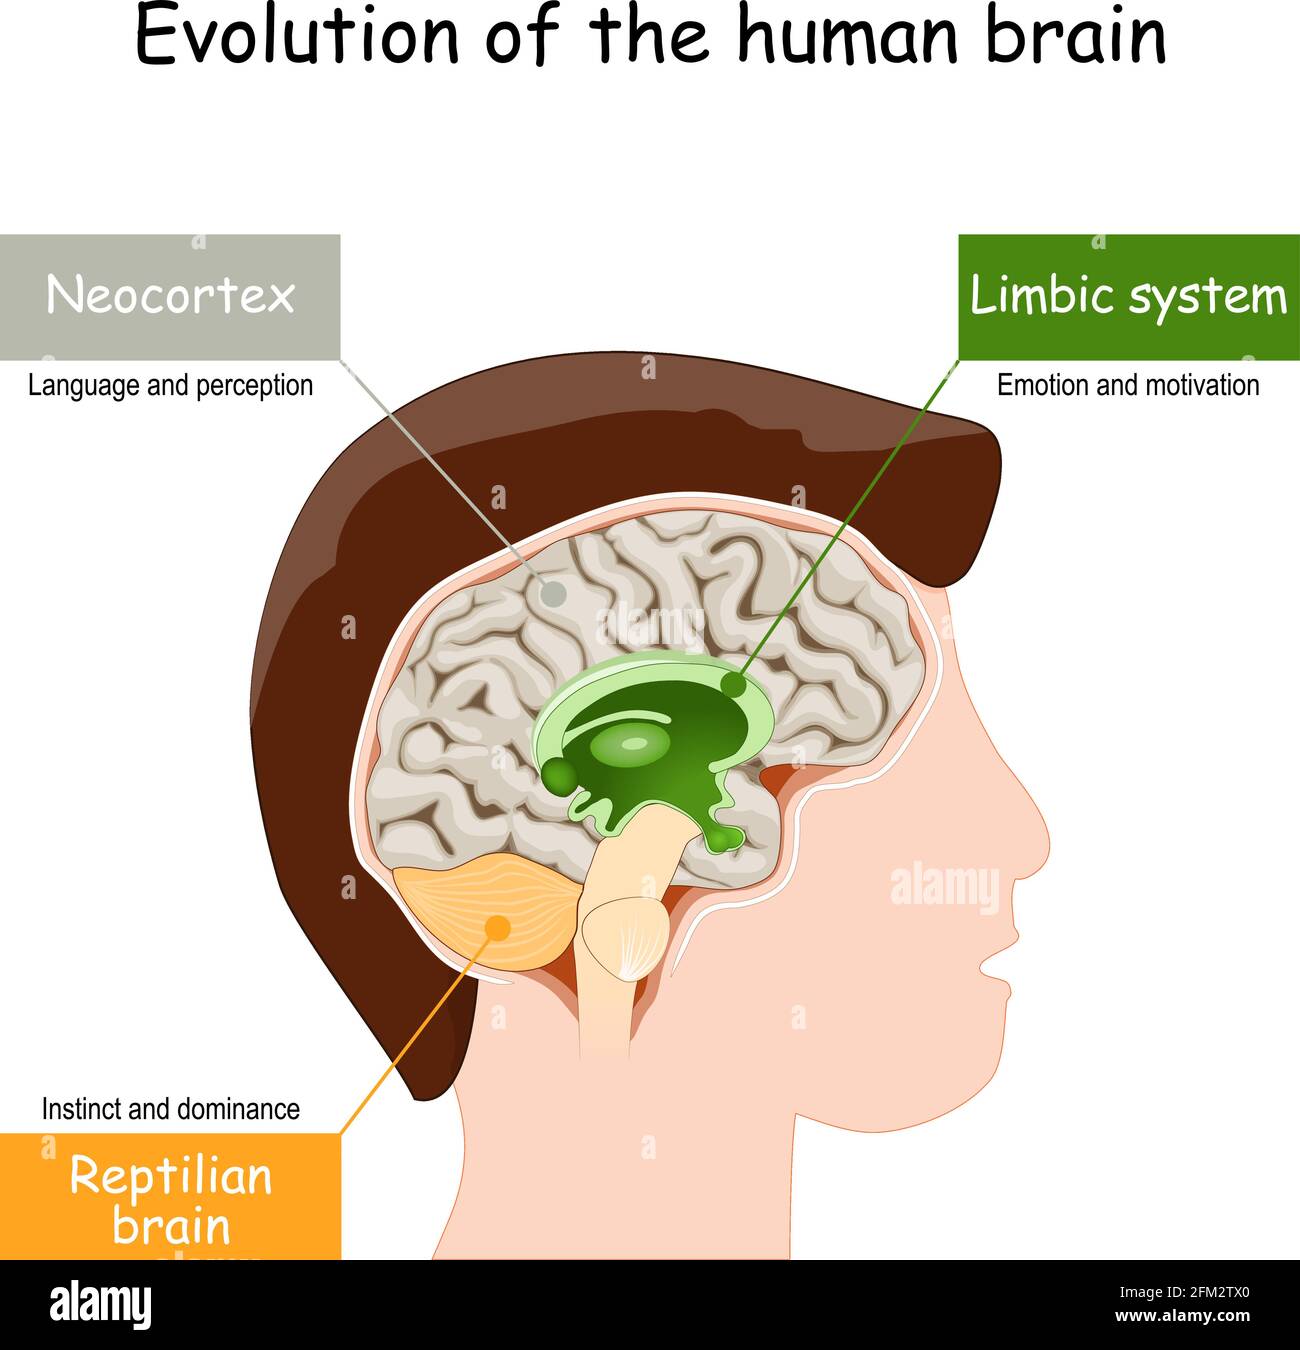 Brain Evolution from reptilian brain, to limbic system and neocortex. Vector illustration Stock Vector